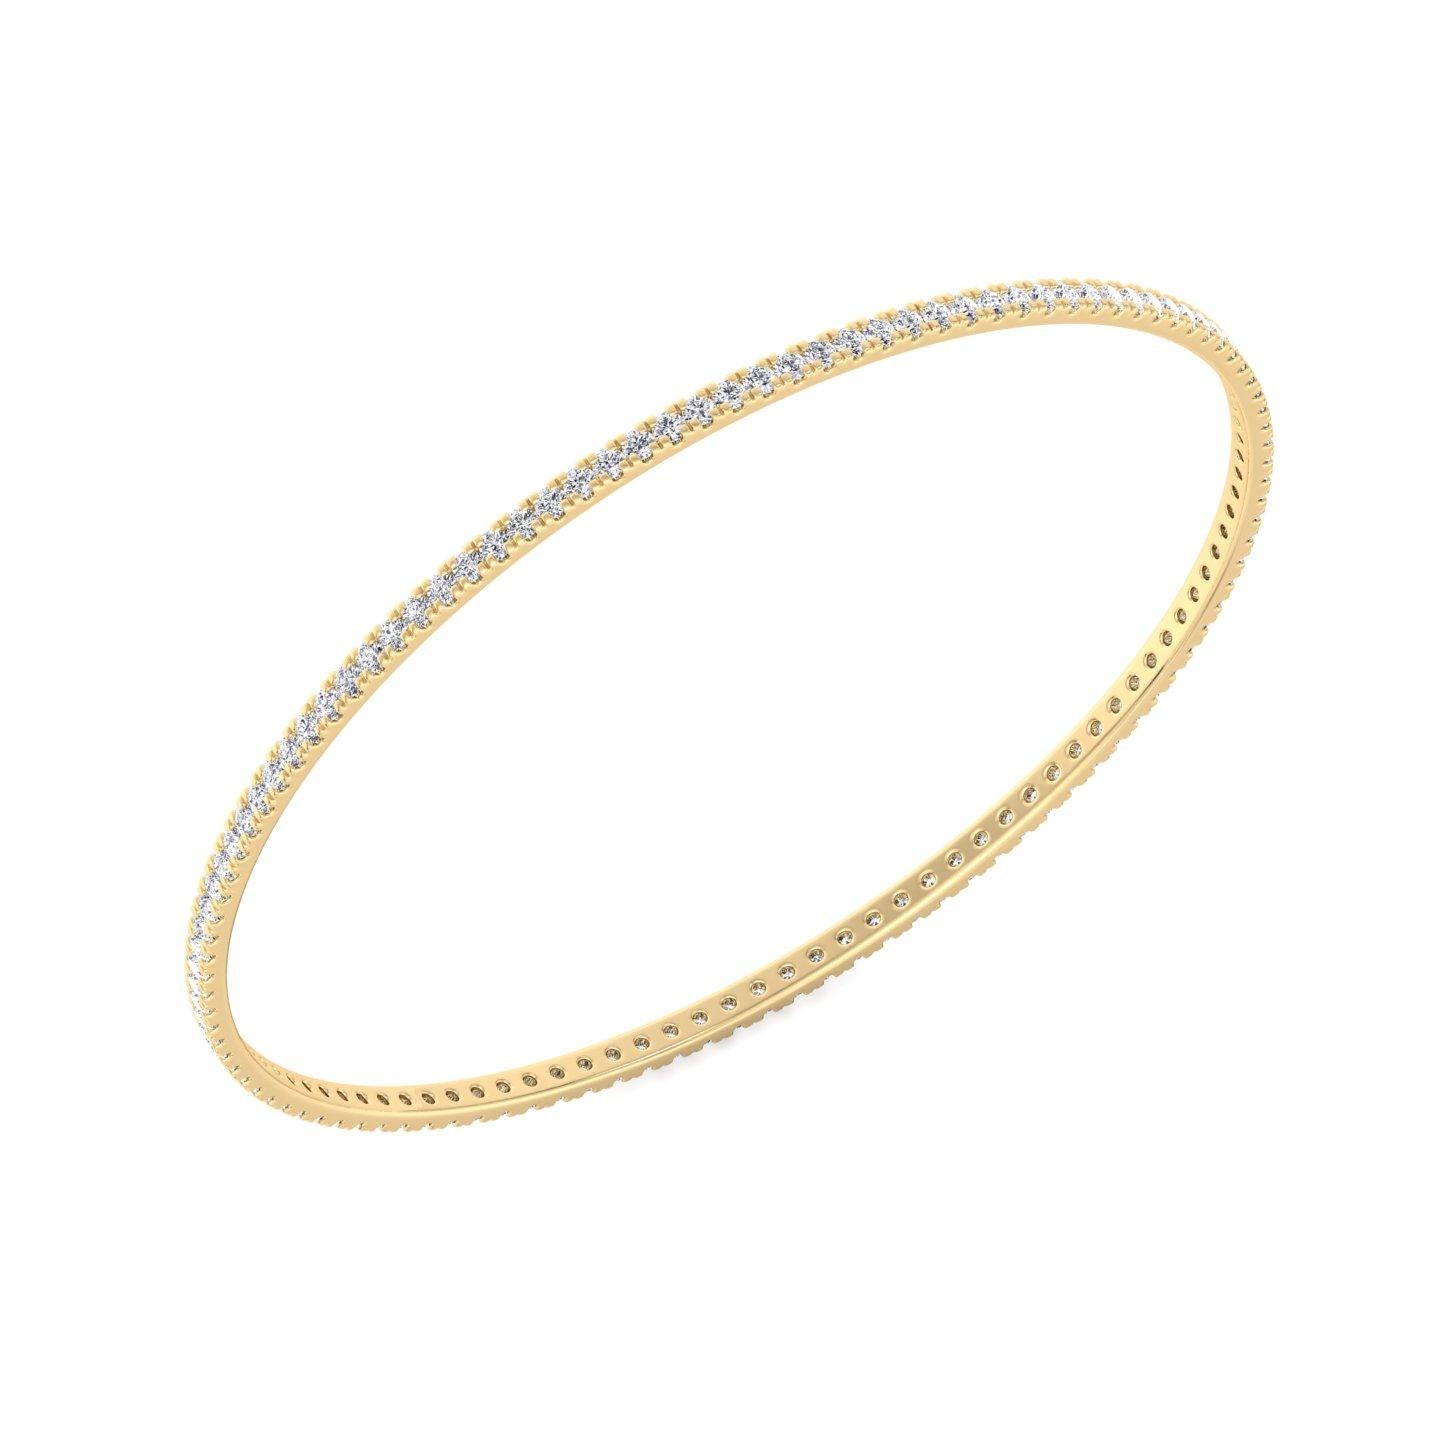 Round Cut 1.71 Carat Flexible Diamond Bangle in 14k Yellow Gold For Sale